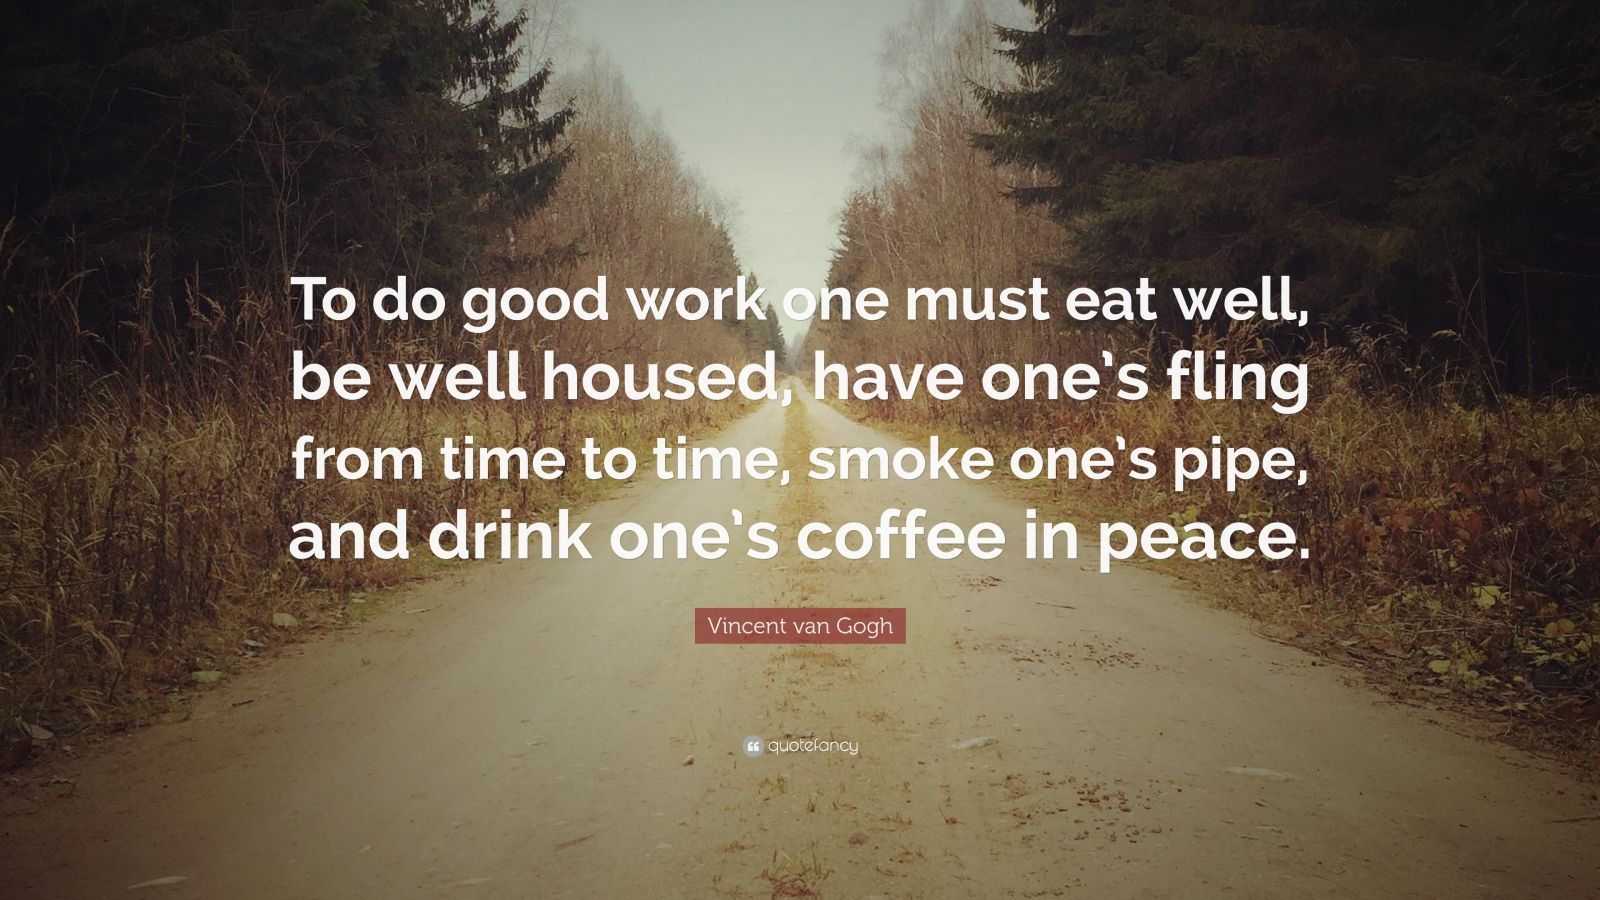 Vincent Van Gogh Quote To Do Good Work One Must Eat Well Be Well Housed Have One S Fling From Time To Time Smoke One S Pipe And Drink One S 12 Wallpapers Quotefancy